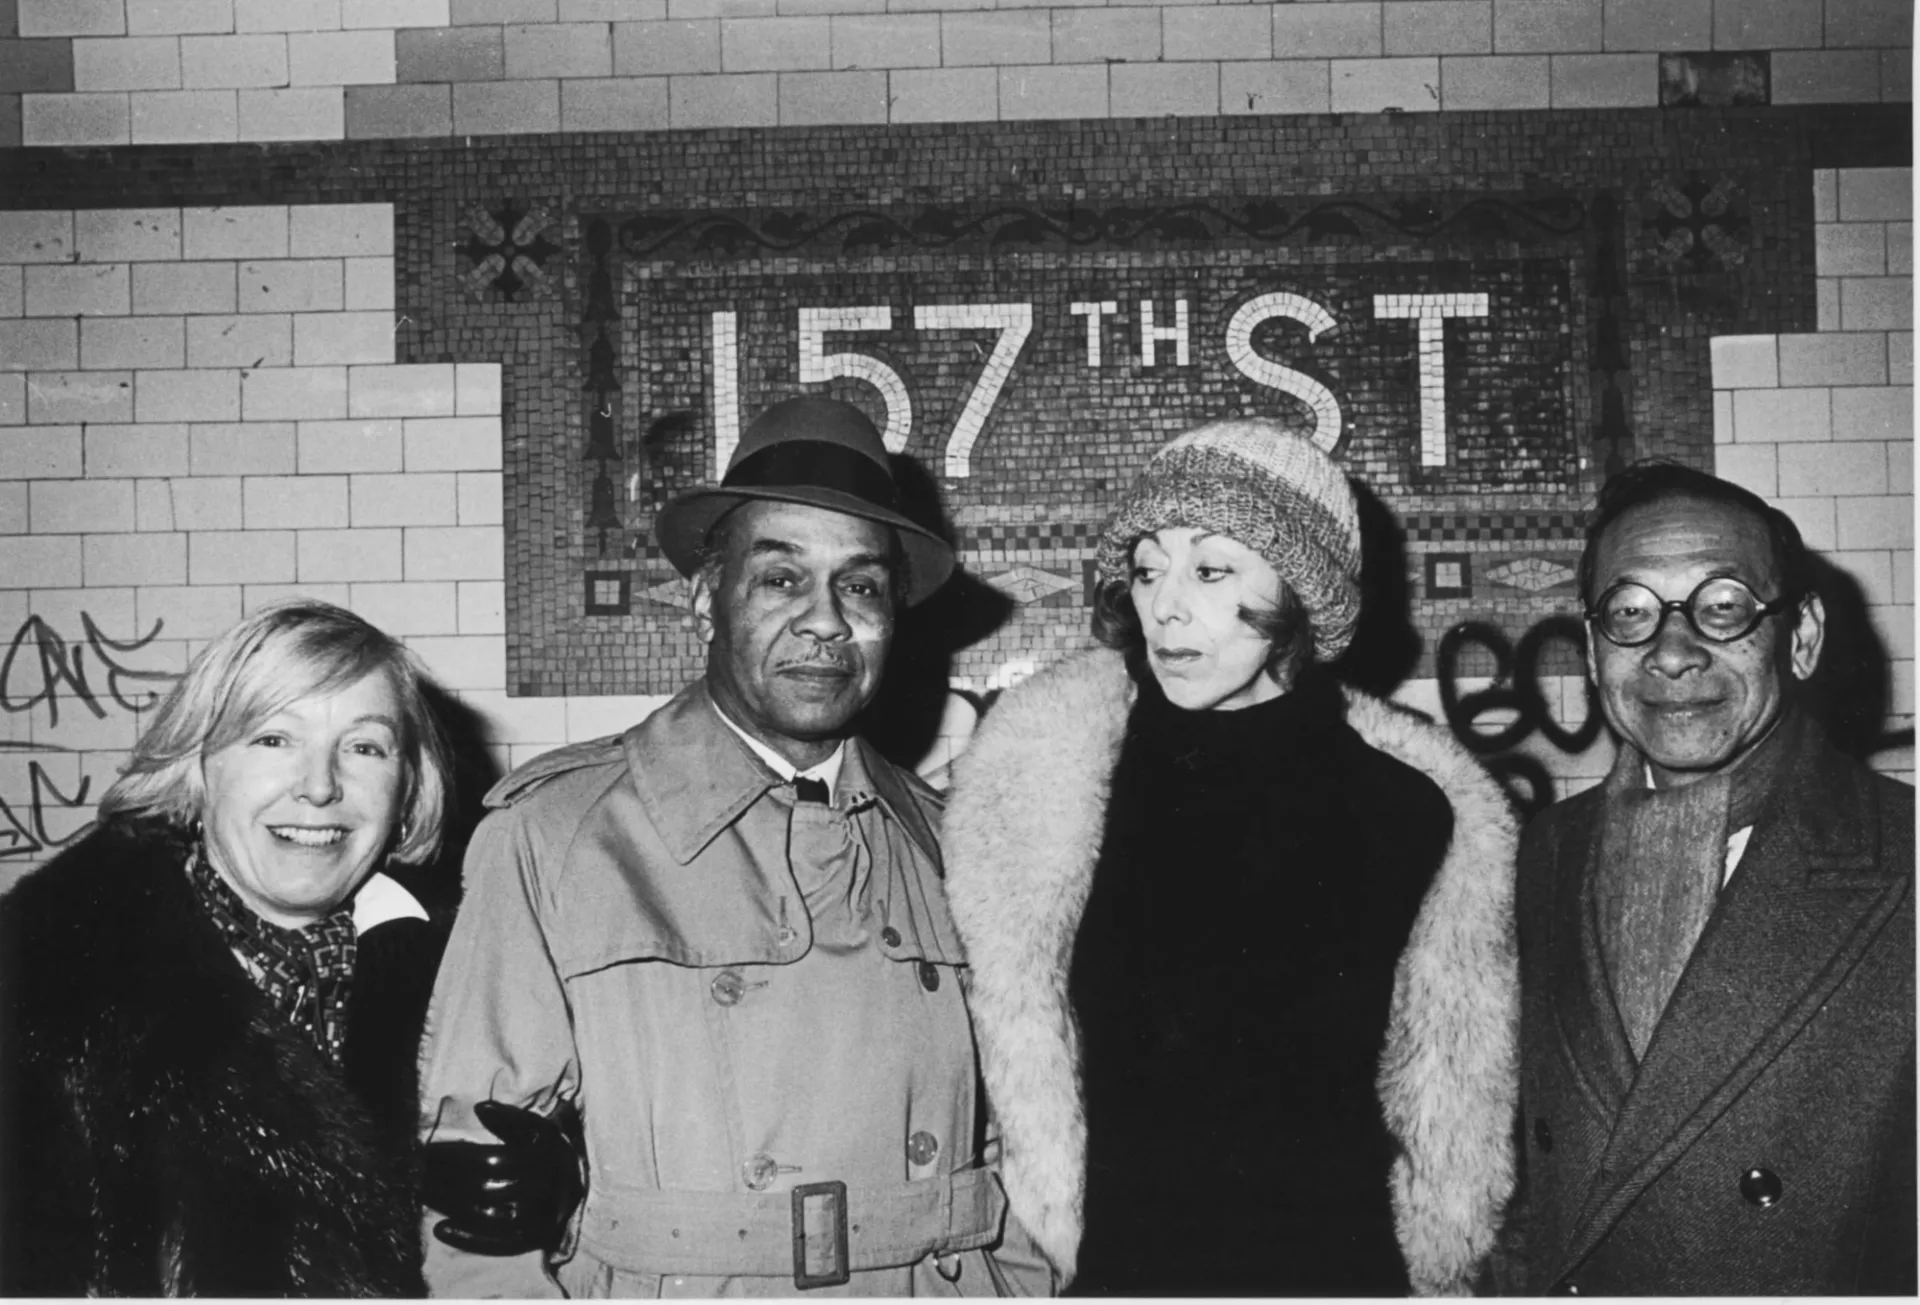 A black and white photograph of four people dressed in coats posing beneath a subway mosaic displaying "157th Street." Graffiti is visible on the surrounding subway tiles.